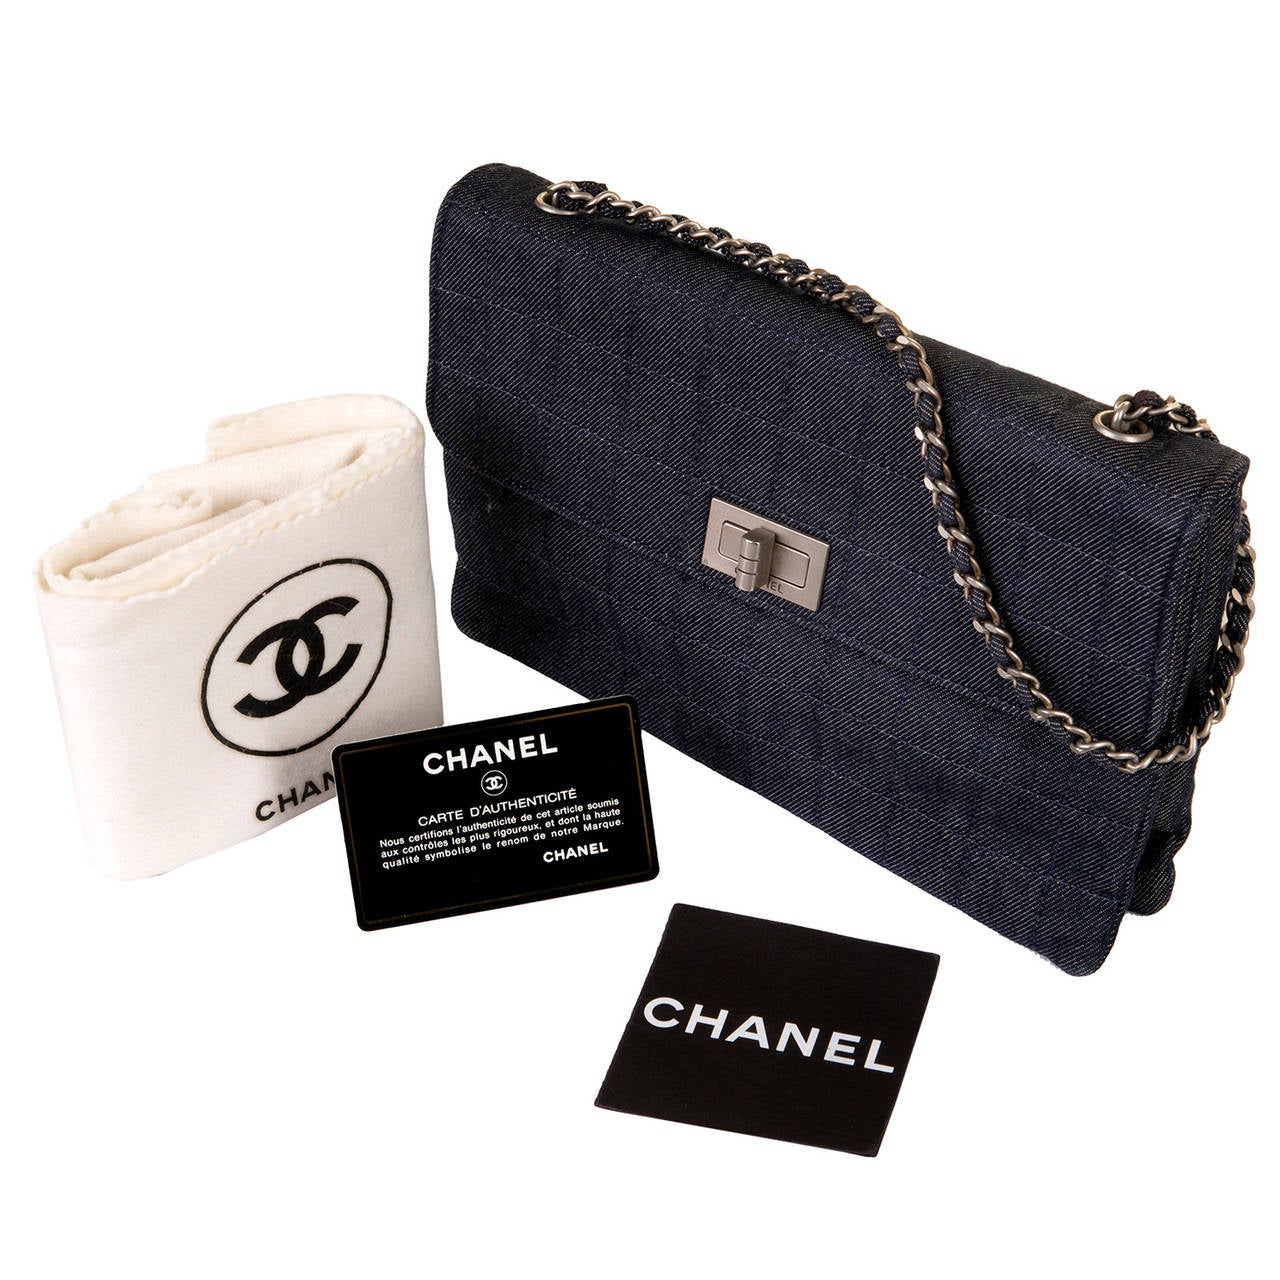 A Rare Très Chic Chanel 25cm Bag in Blue 'Window Pane' check Denim, complemented with silver palladium hardware. In 'Store-fresh'condition, this special-order bag is fitted with a 'Mademoiselle' clasp, with a chain strap interlinked with denim. This